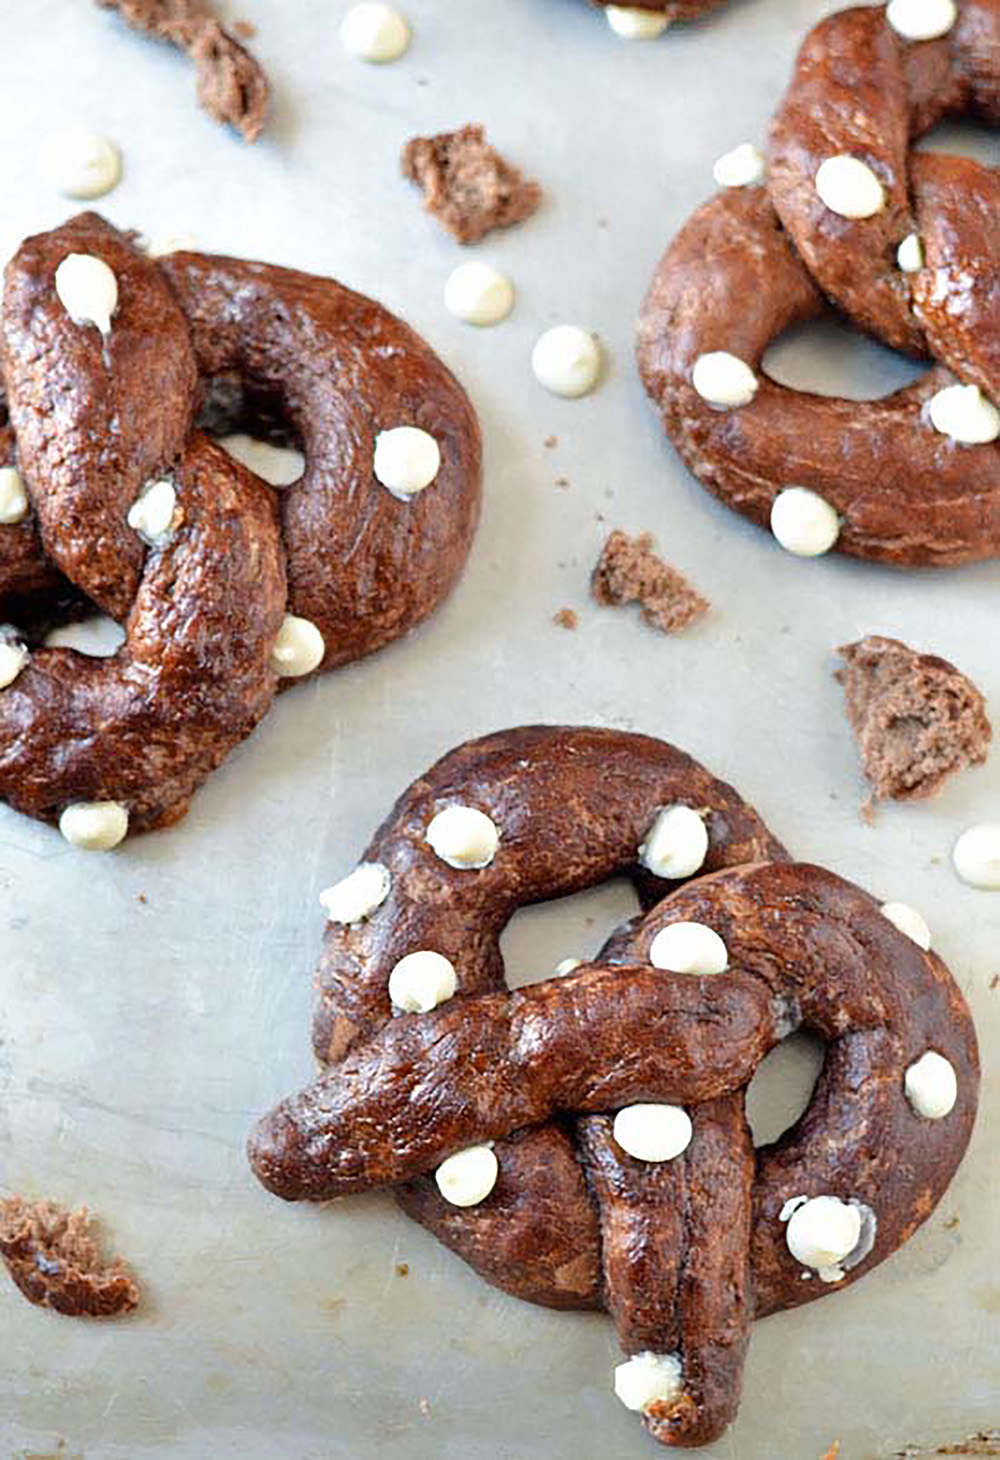 Chocolate Soft Pretzels with White Chocolate Chips